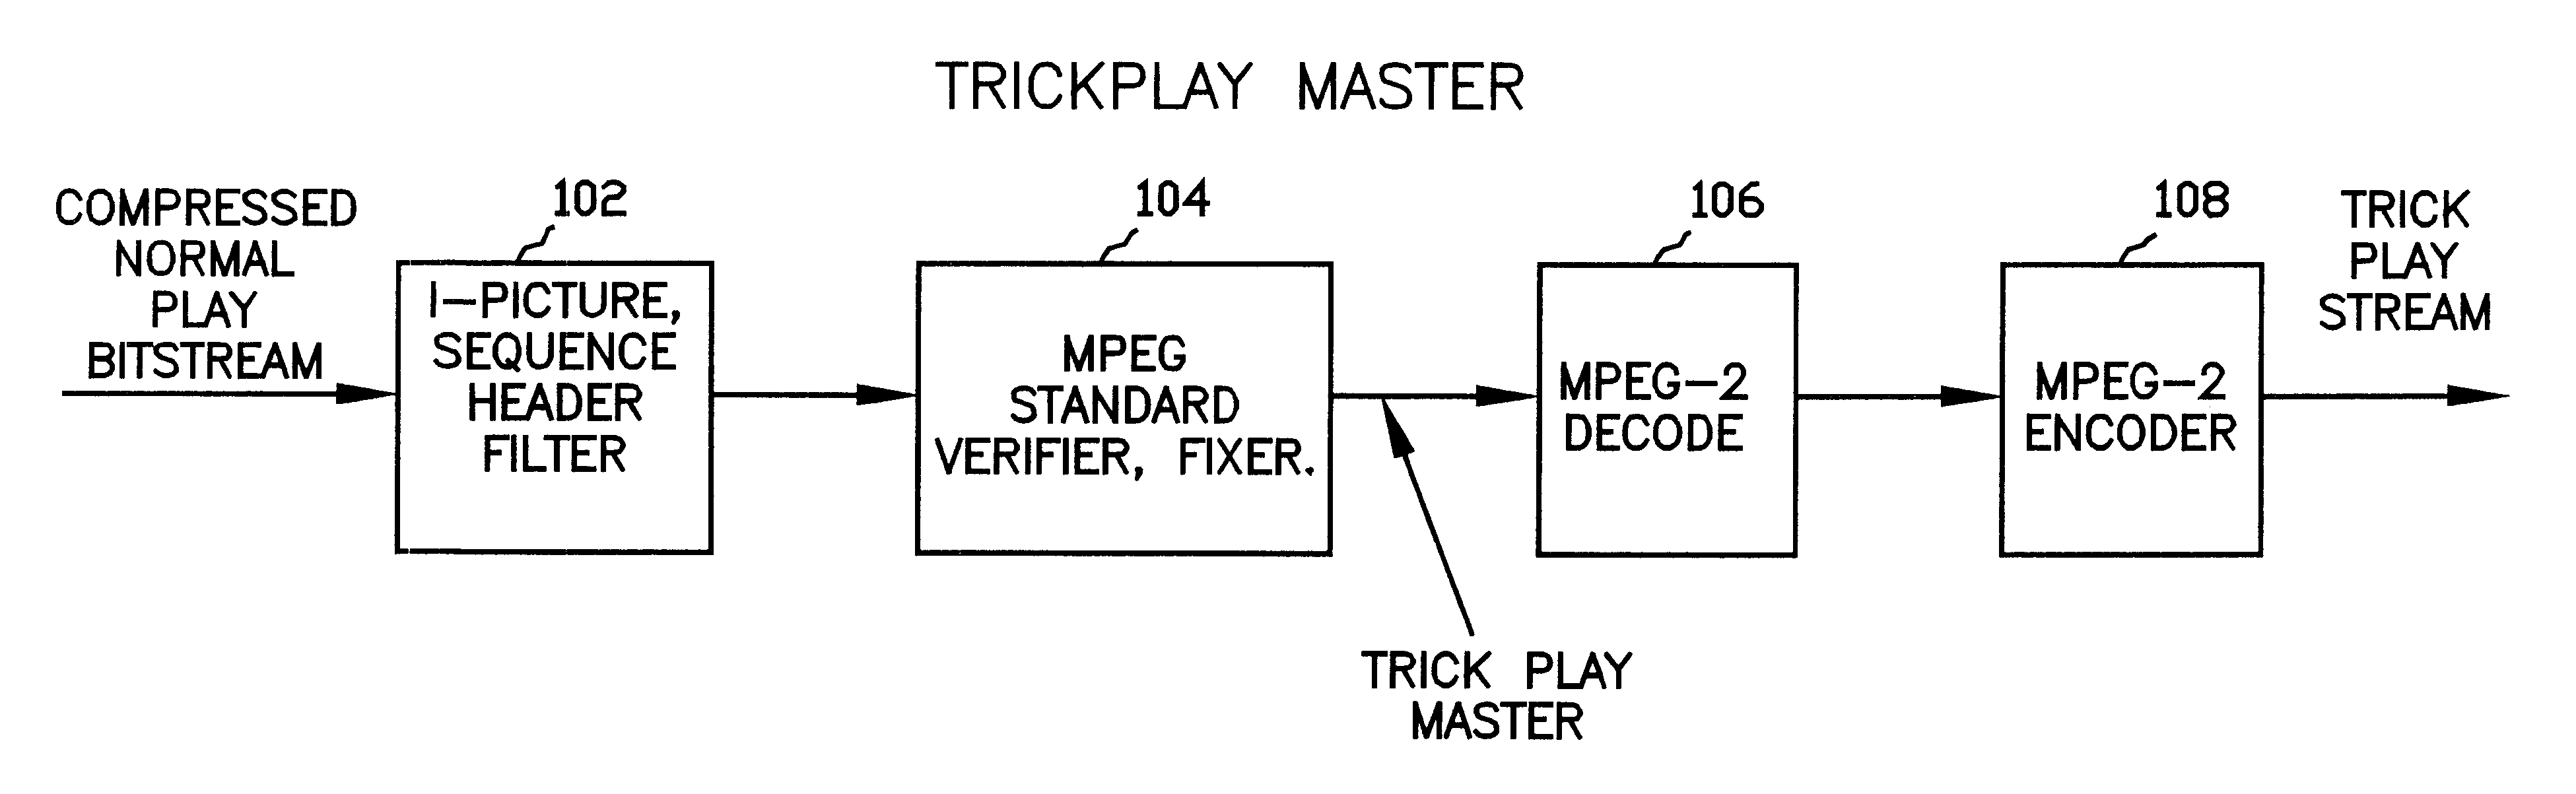 System and method for creating trick play video streams from a compressed normal play video bitstream